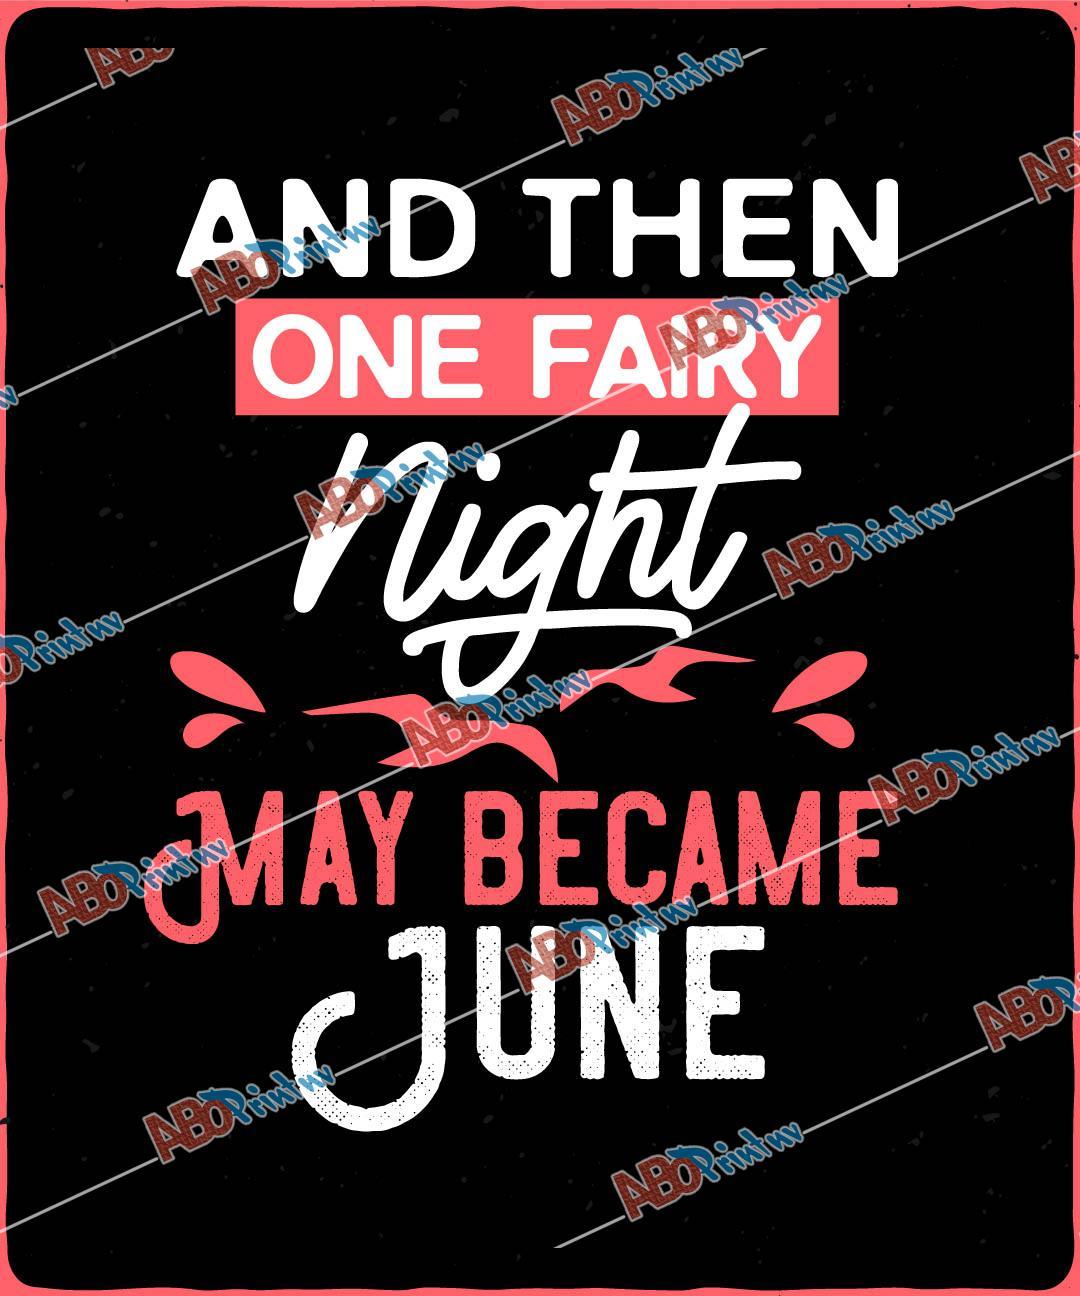 And then, one fairy night, May became June.jpg